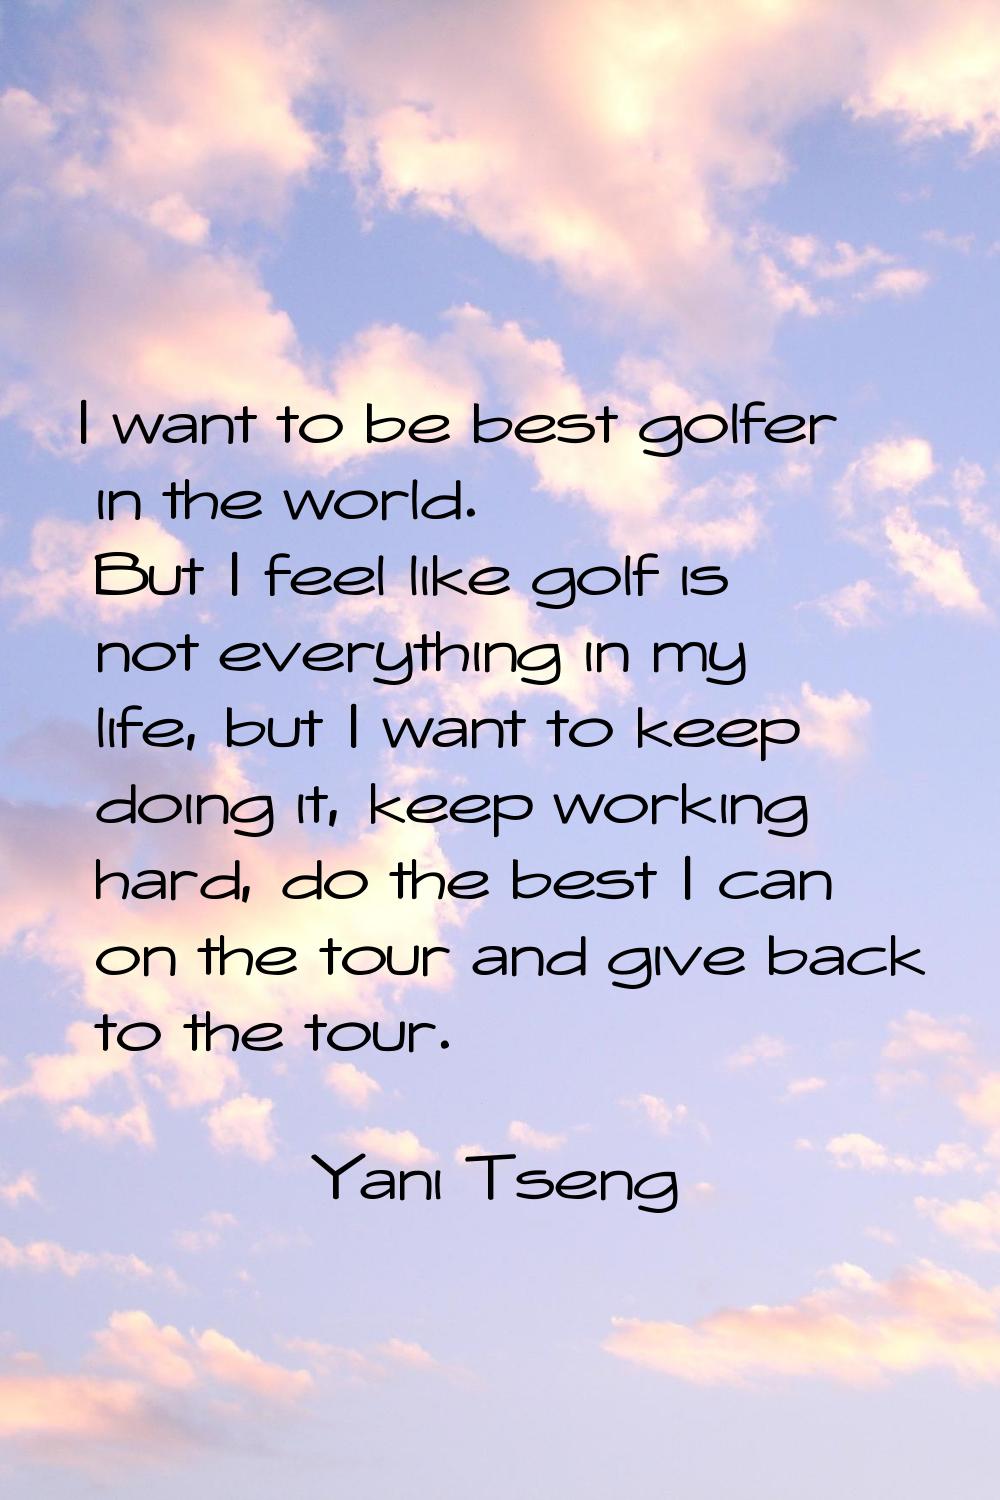 I want to be best golfer in the world. But I feel like golf is not everything in my life, but I wan